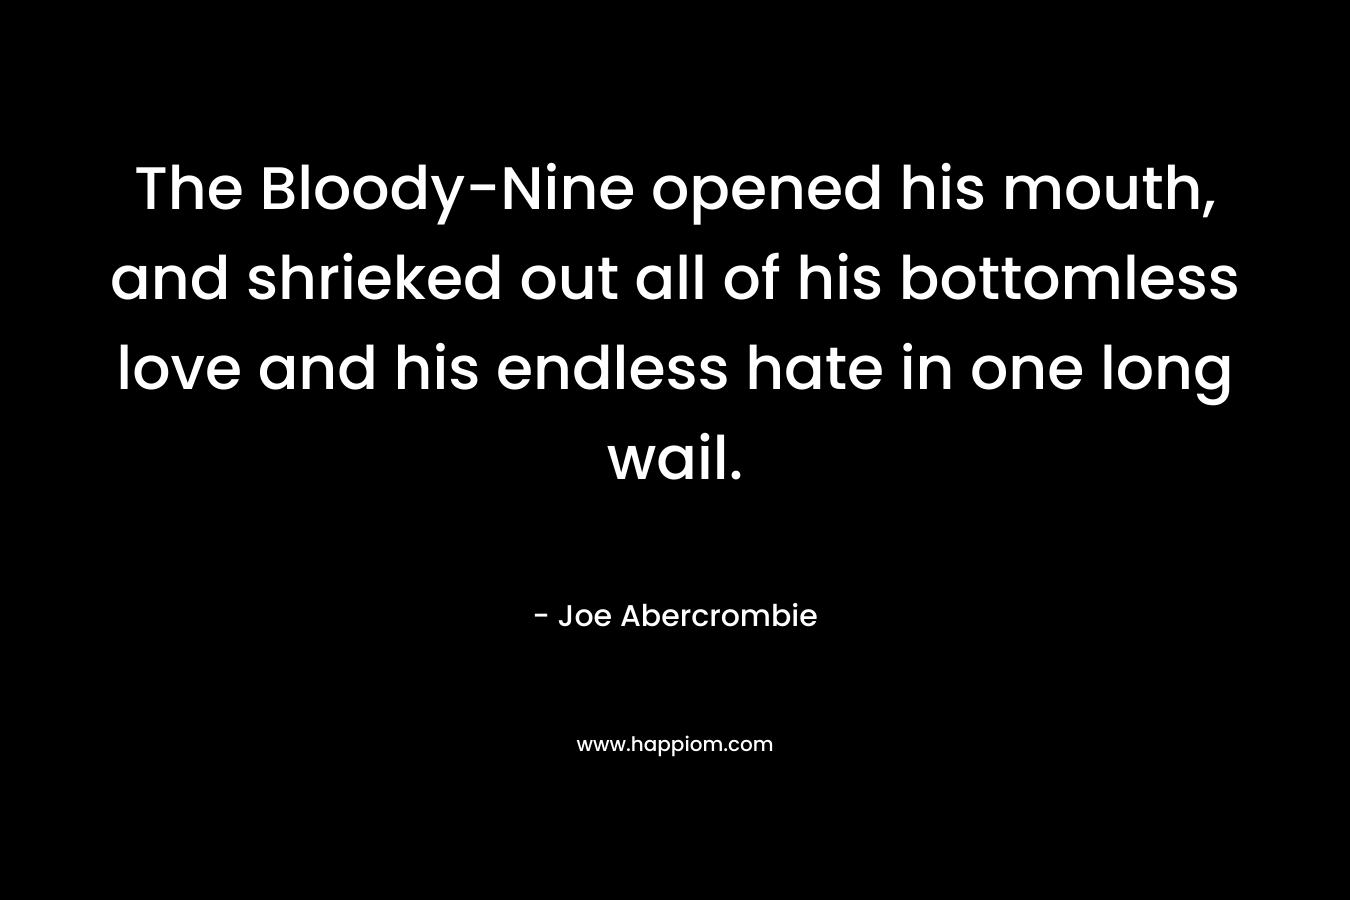 The Bloody-Nine opened his mouth, and shrieked out all of his bottomless love and his endless hate in one long wail. – Joe Abercrombie